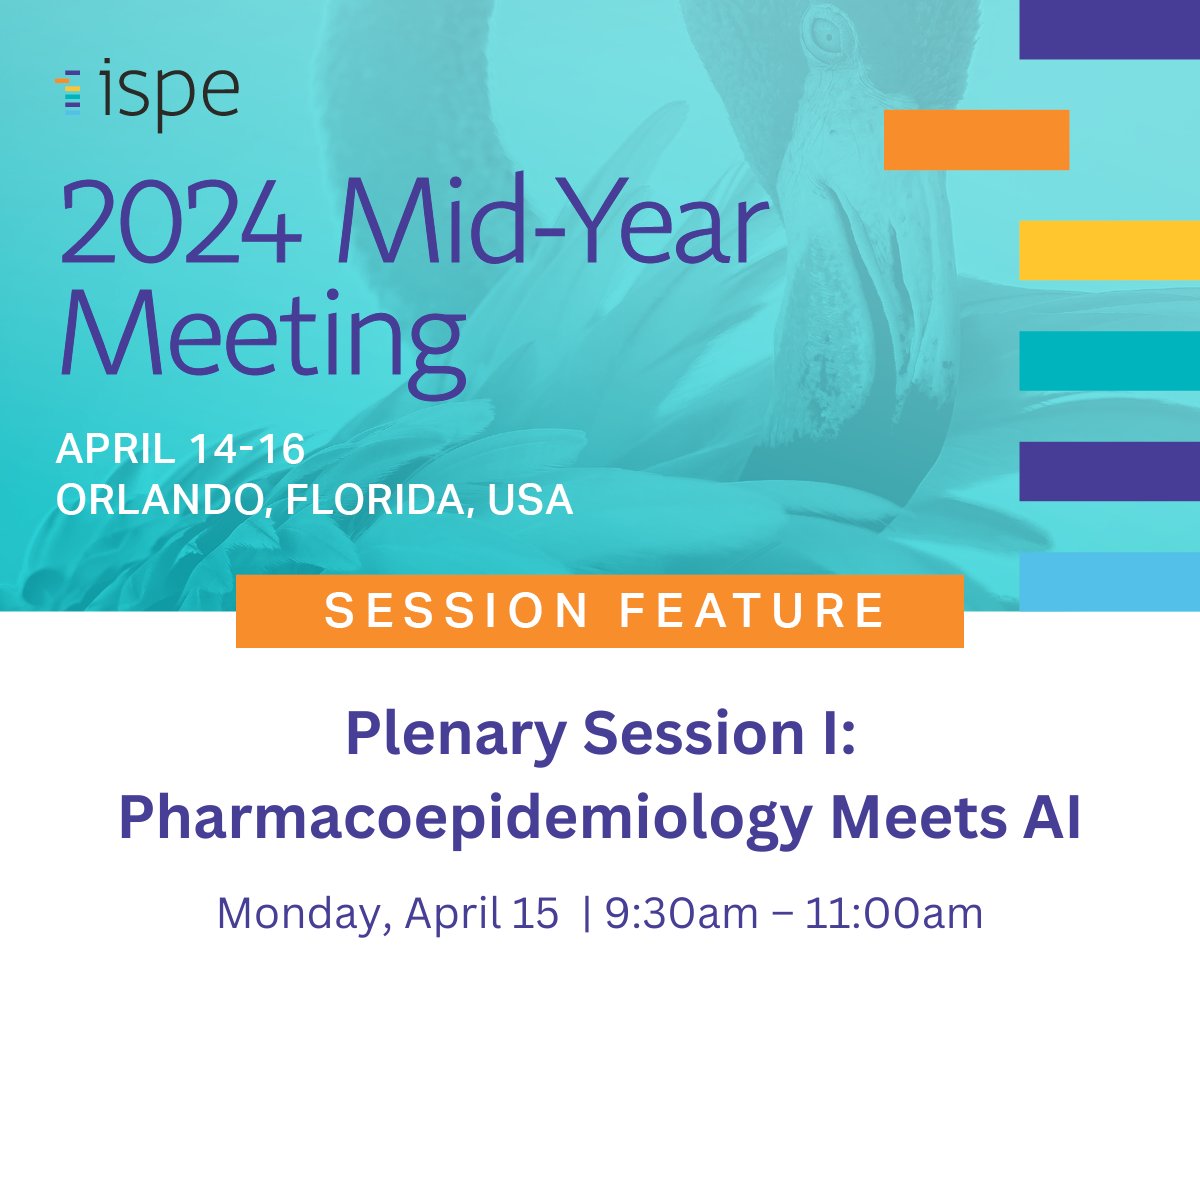 Join us for 'Plenary Session I: Pharmacoepidemiology Meets AI' at our 2024 Mid-Year Meeting! Explore the intersection of AI & drug evaluations with experts. View the full agenda & register now: bit.ly/3URdrph #Pharmacoepidemiology #Pharmacovigilance